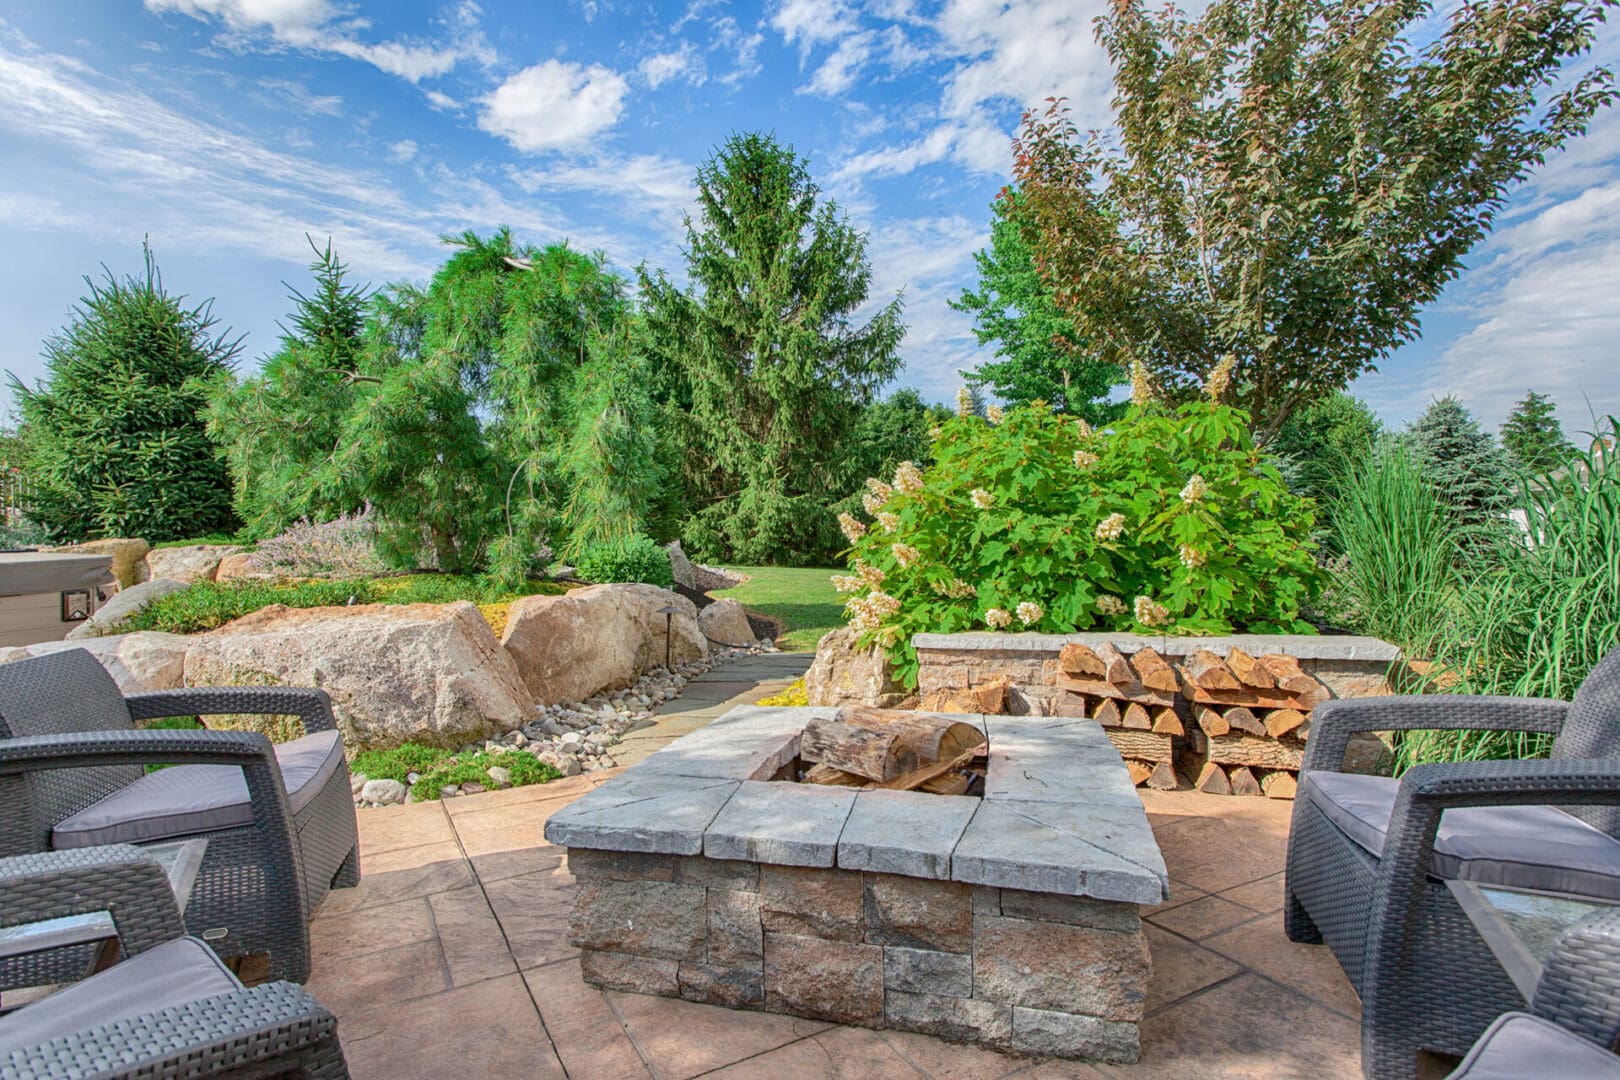 A custom backyard with wicker furniture and a fire pit.